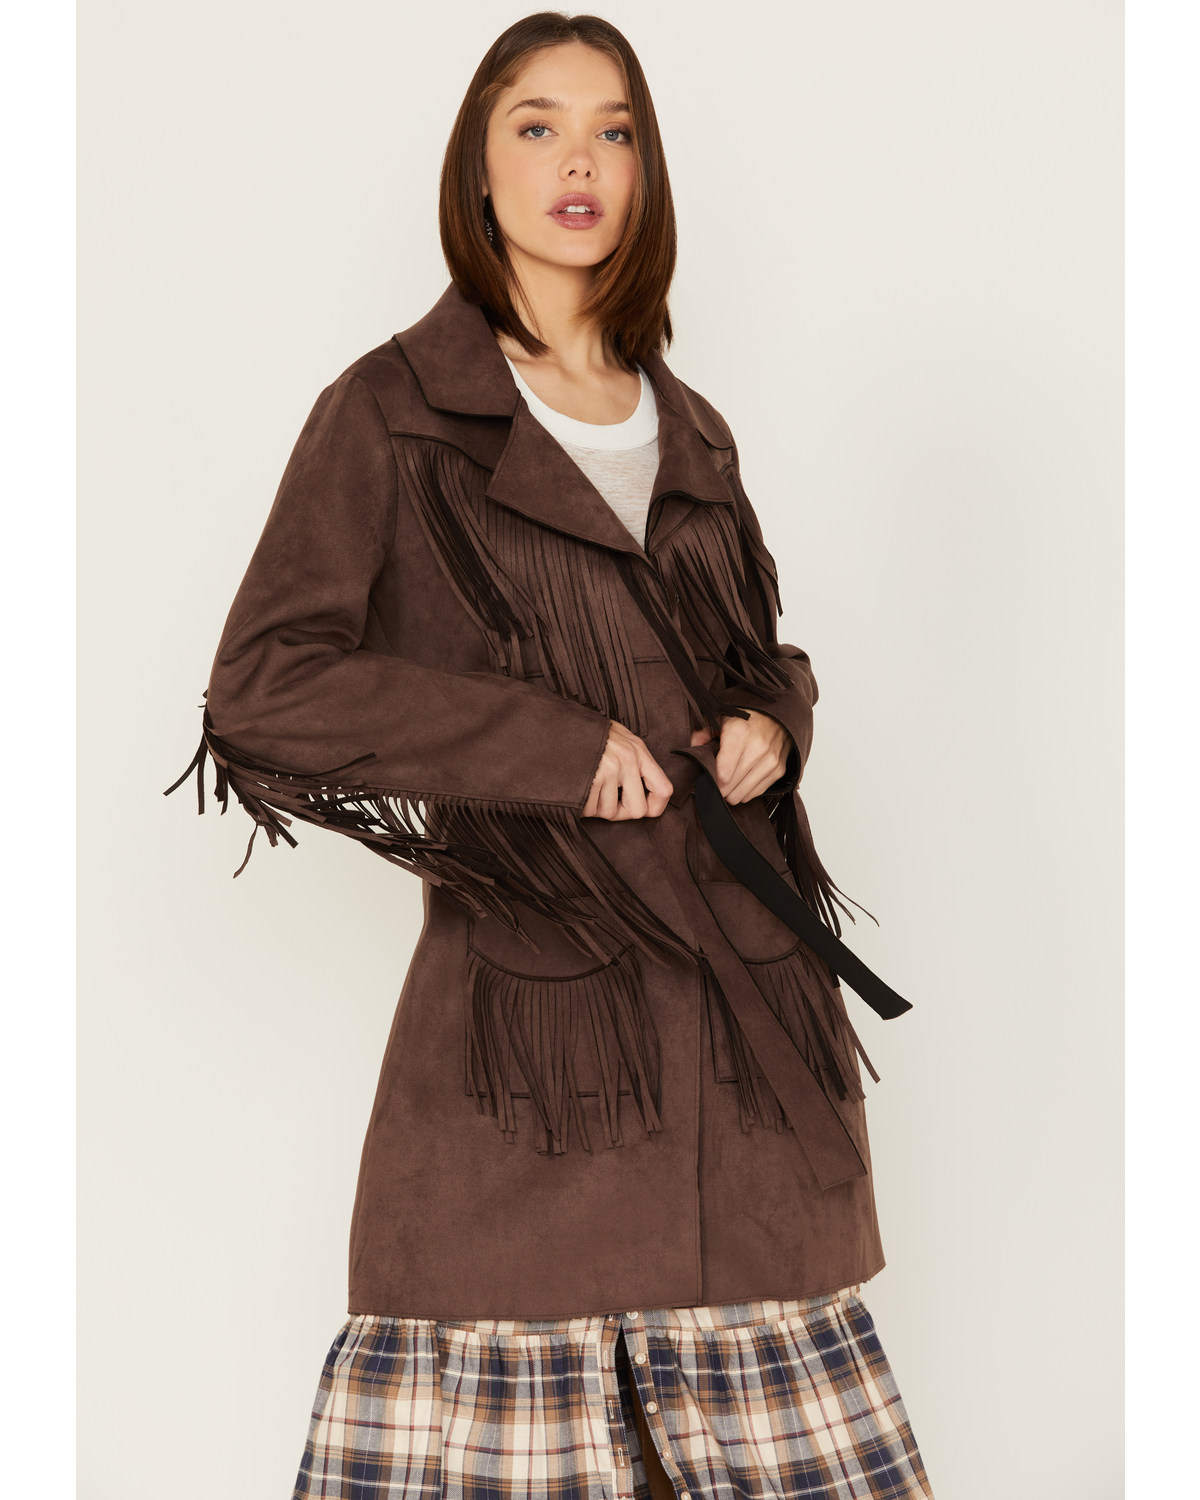 Powder River Outfitters Women's Suede Fringe Coat